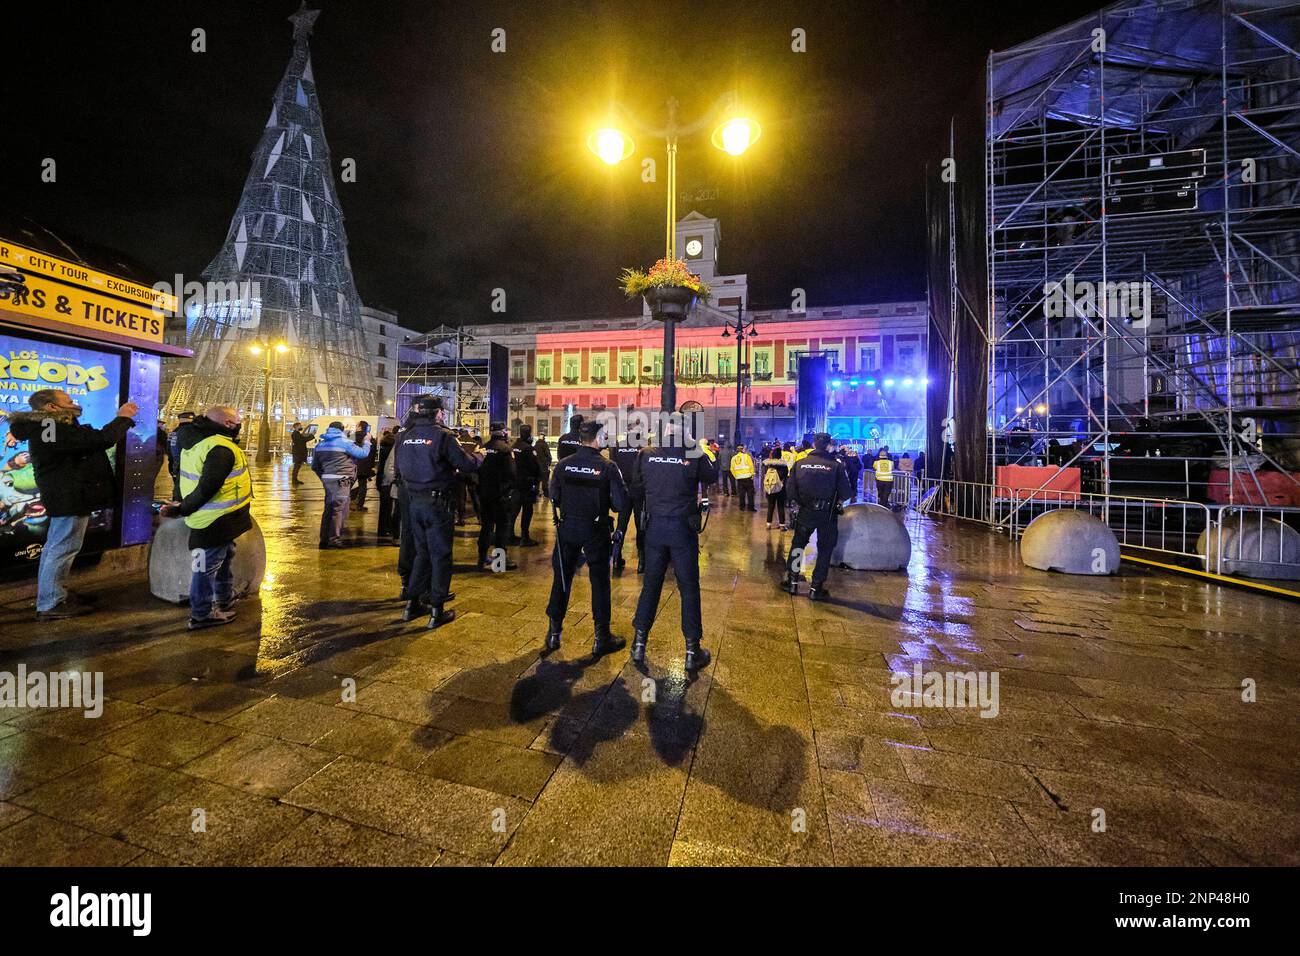 Several people watch Nacho Cano's concert in Puerta del Sol, Madrid  (Spain), on December 31st, 2020. Nacho Cano has performed this New Year's  Eve with only one song minutes before the bells